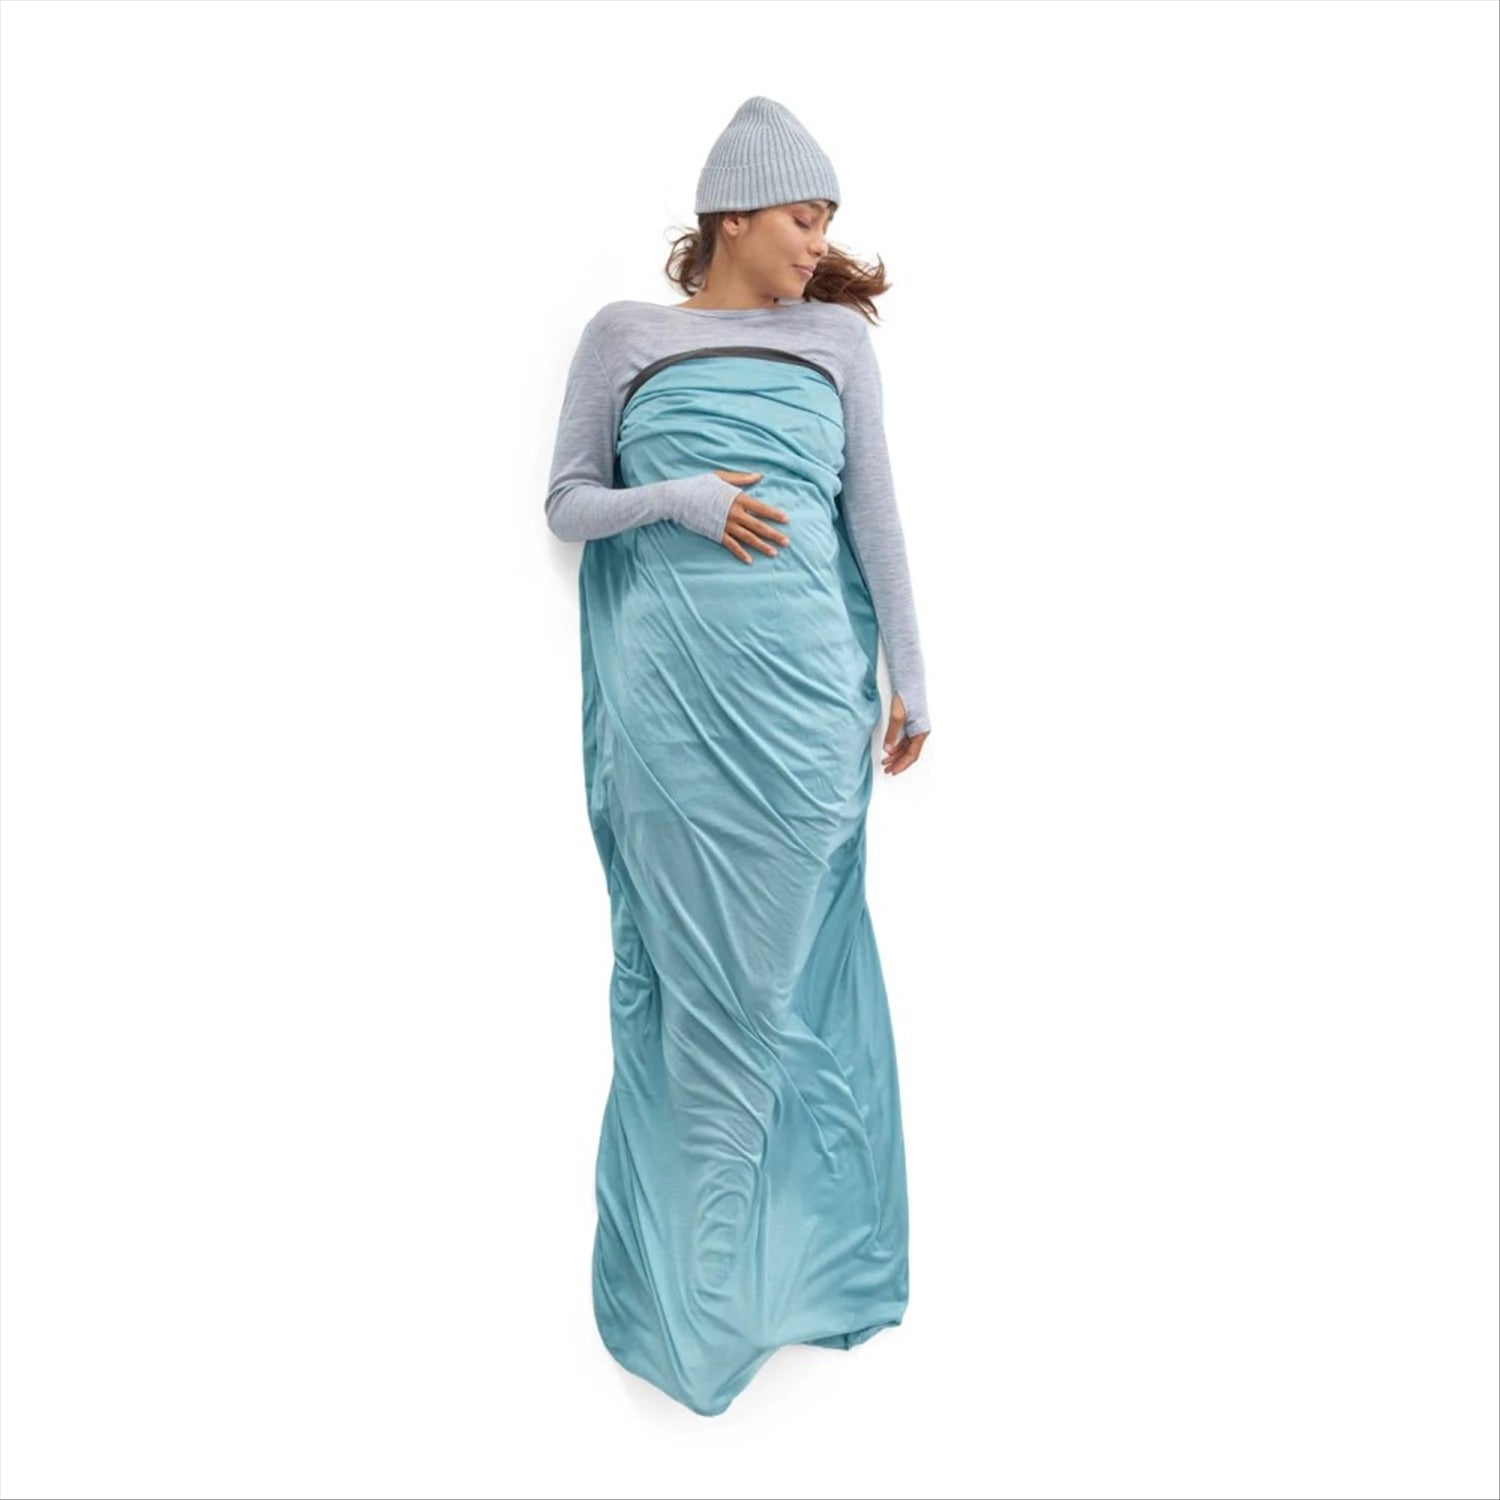 Sea to Summit Sea To Summit Comfort Blend Sleeping Bag Liner - Rectangular Shape, Standard or with Pillow Sleeve